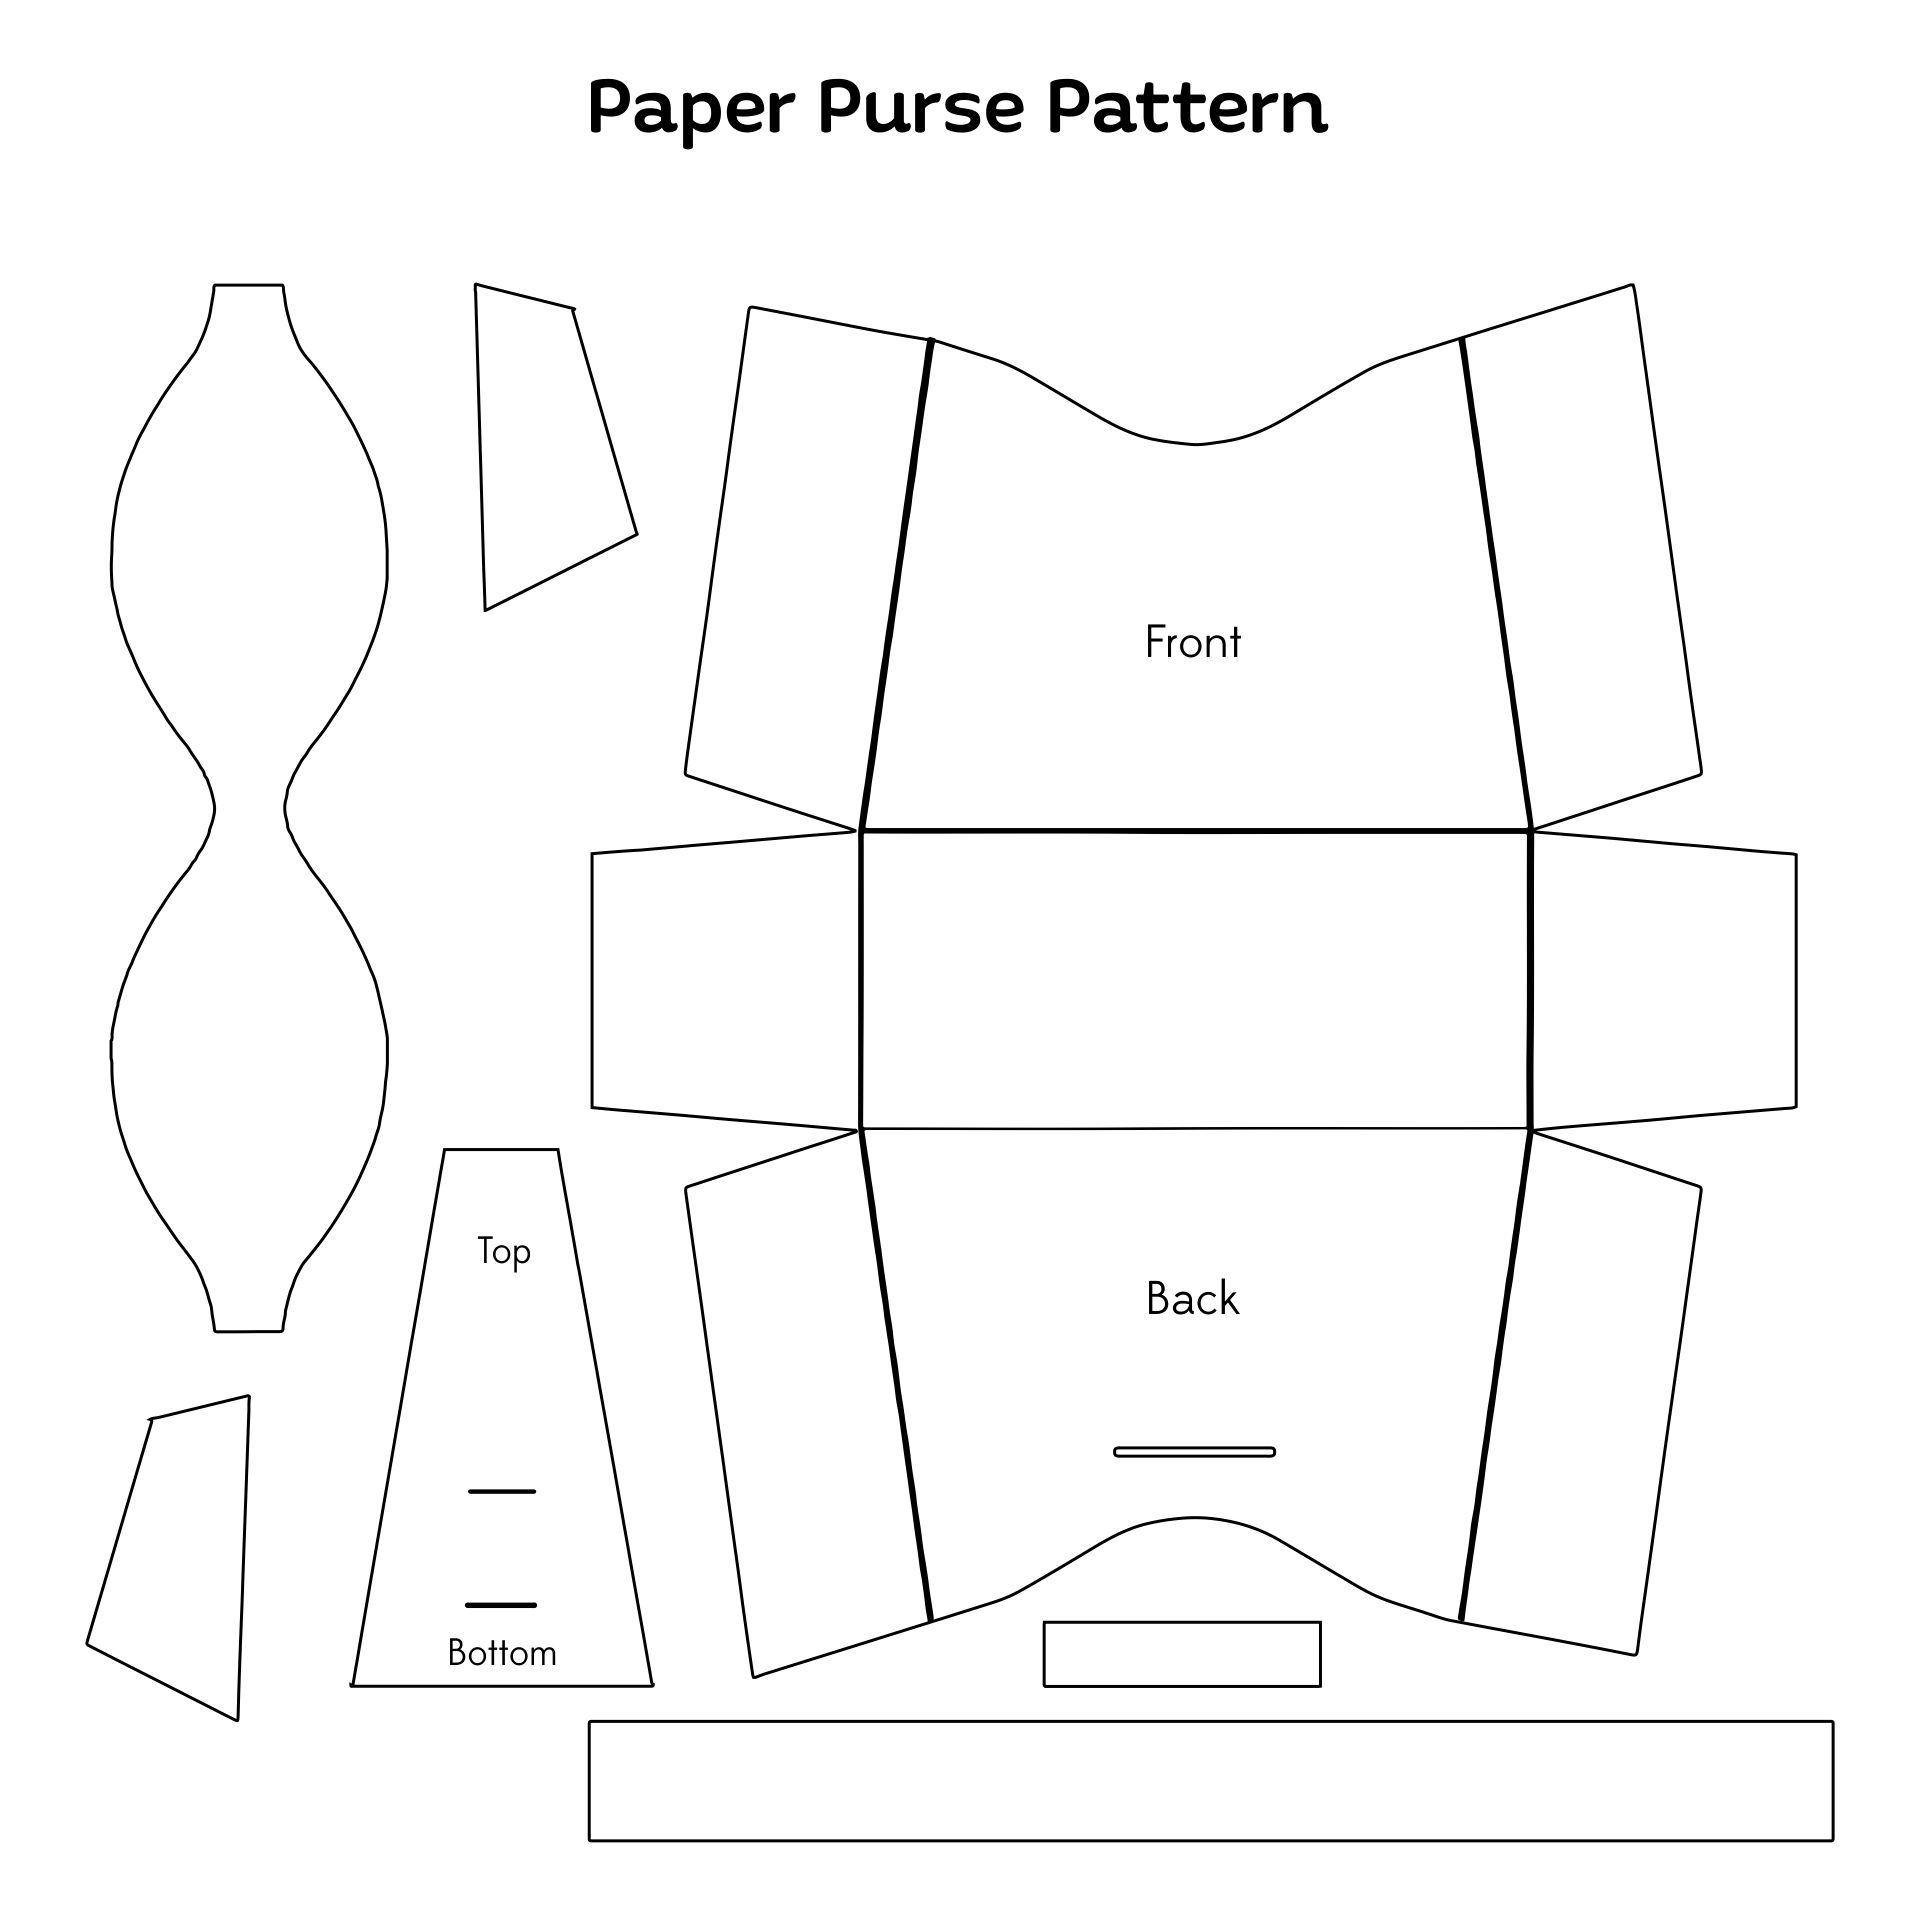 How to Make and Sew In a Custom Support for Your Bag Pattern